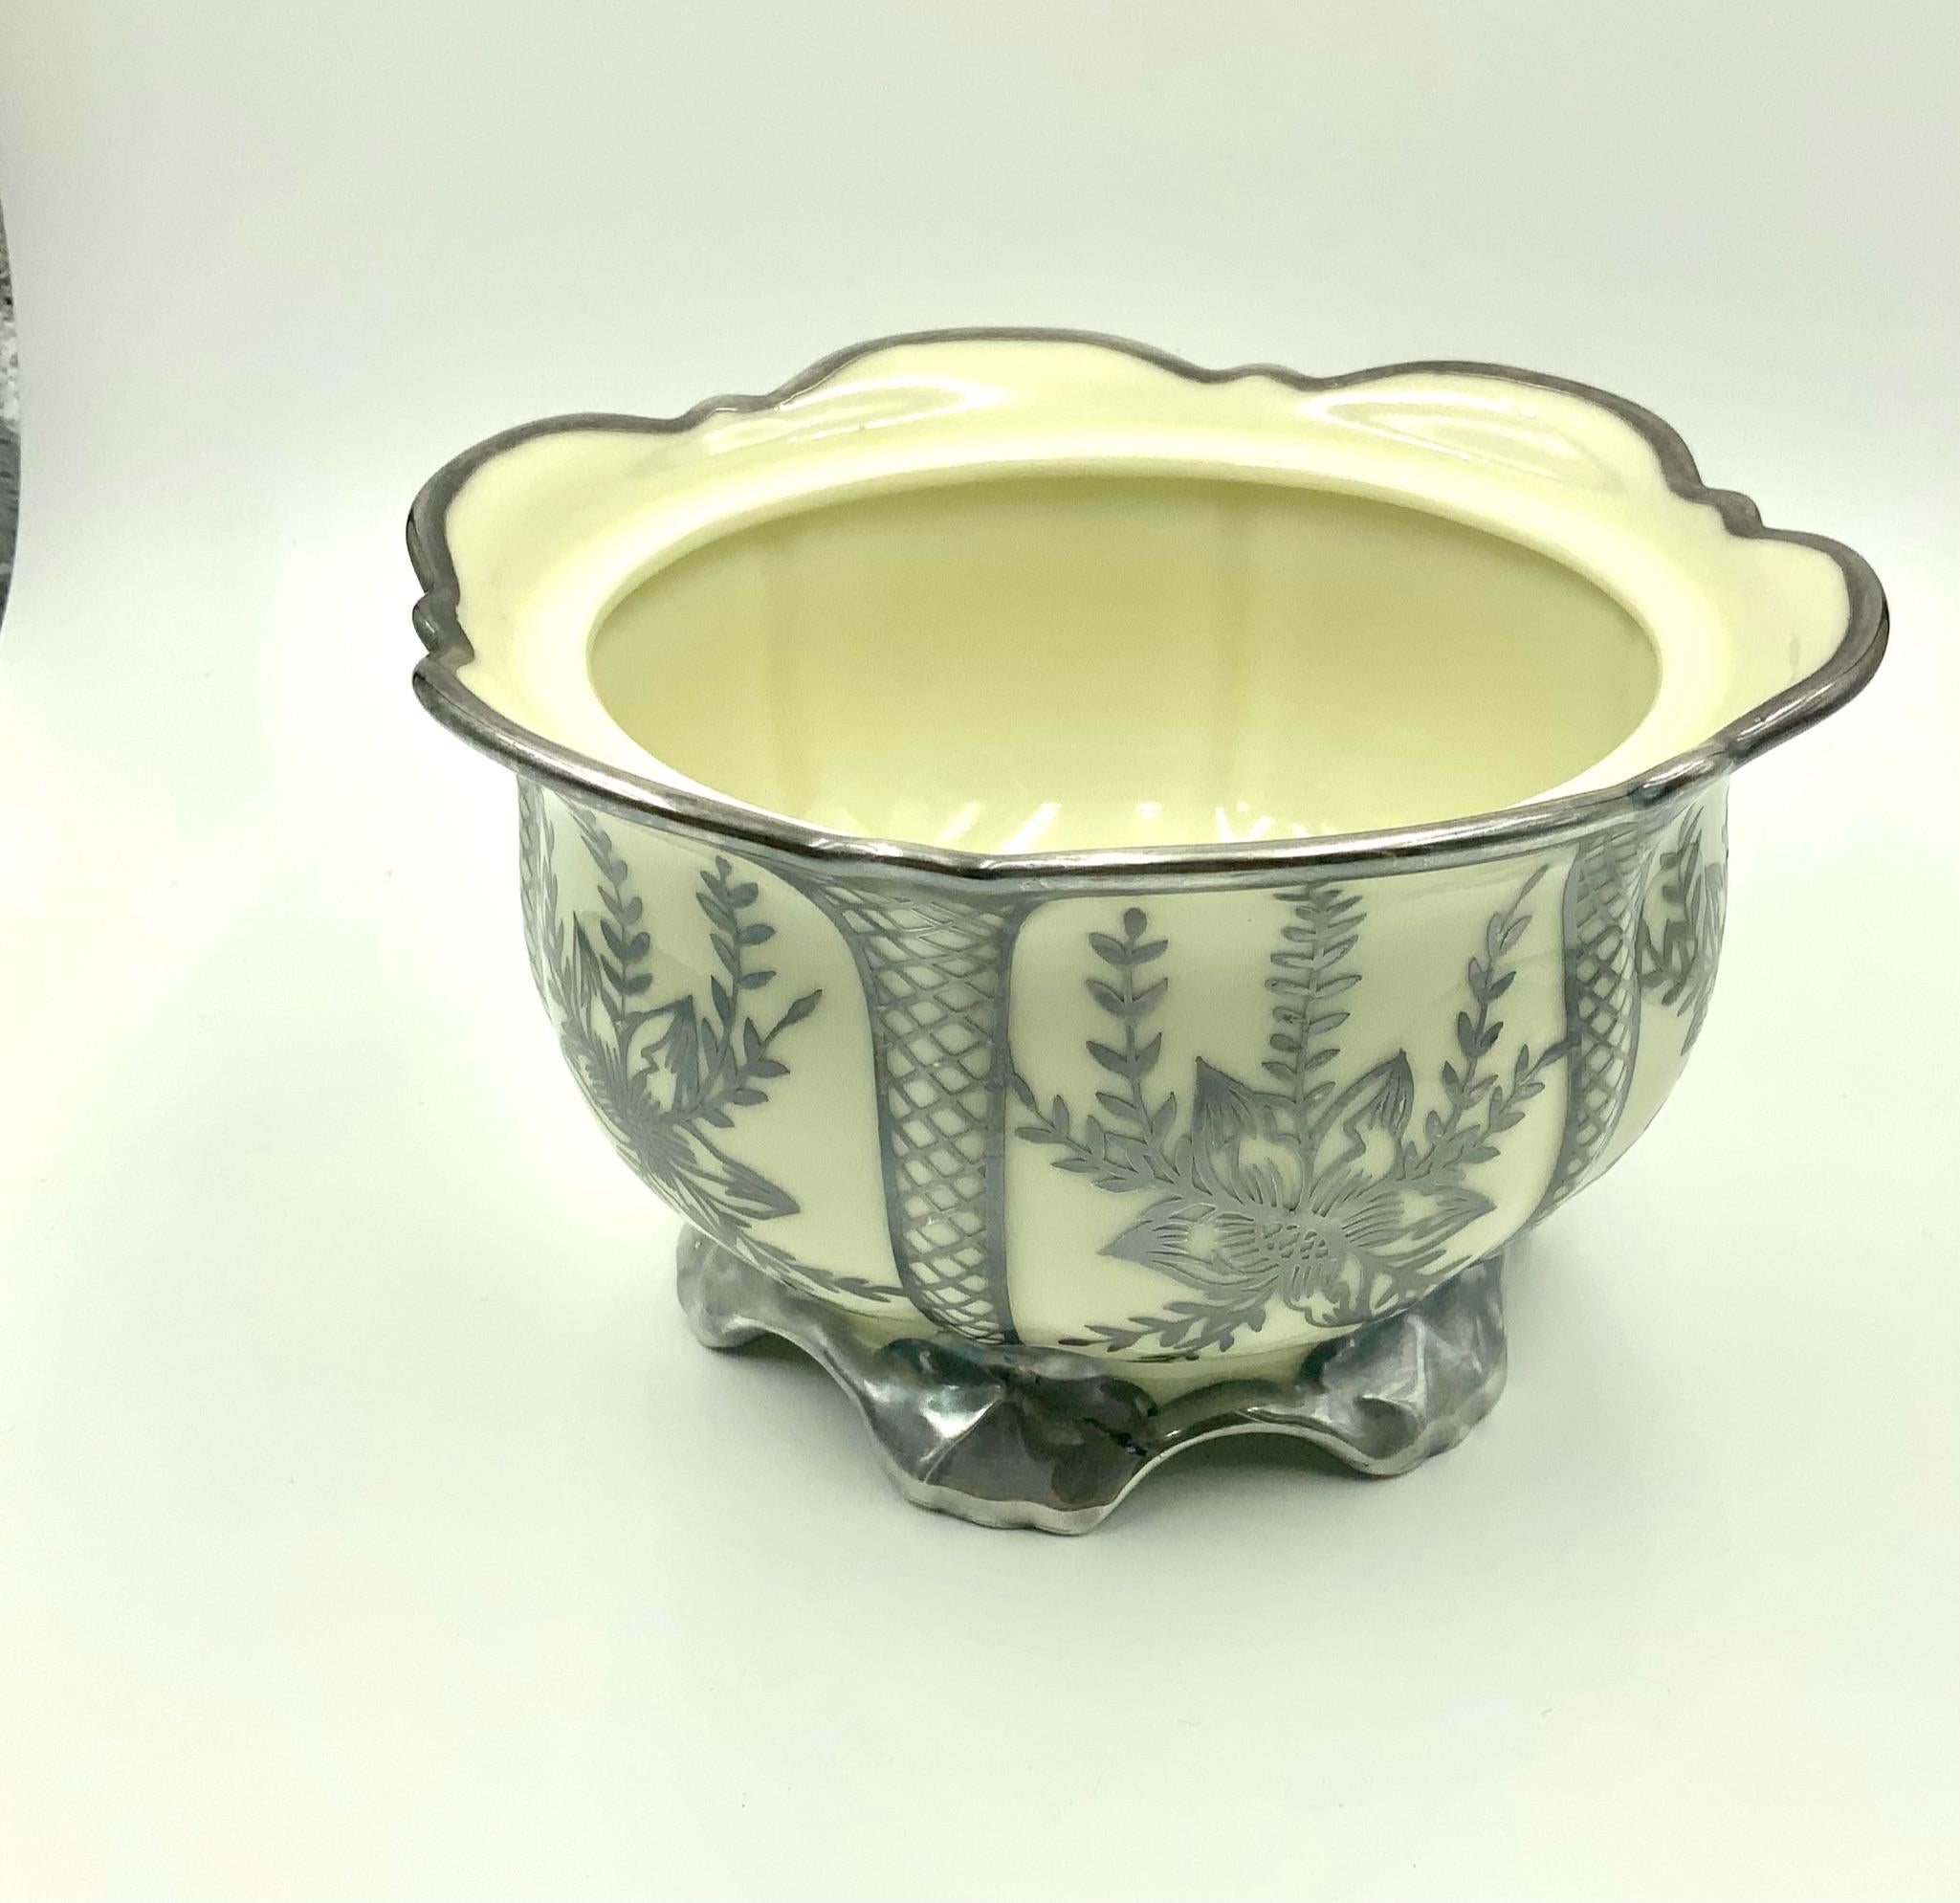 Early 20th century off white porcelain covered bowl by Schoenau Germany featuring a sterling silver overlay design with flowers sections separated by six basket weave sections. The top has a silver overlay finial and the bottom has six silver